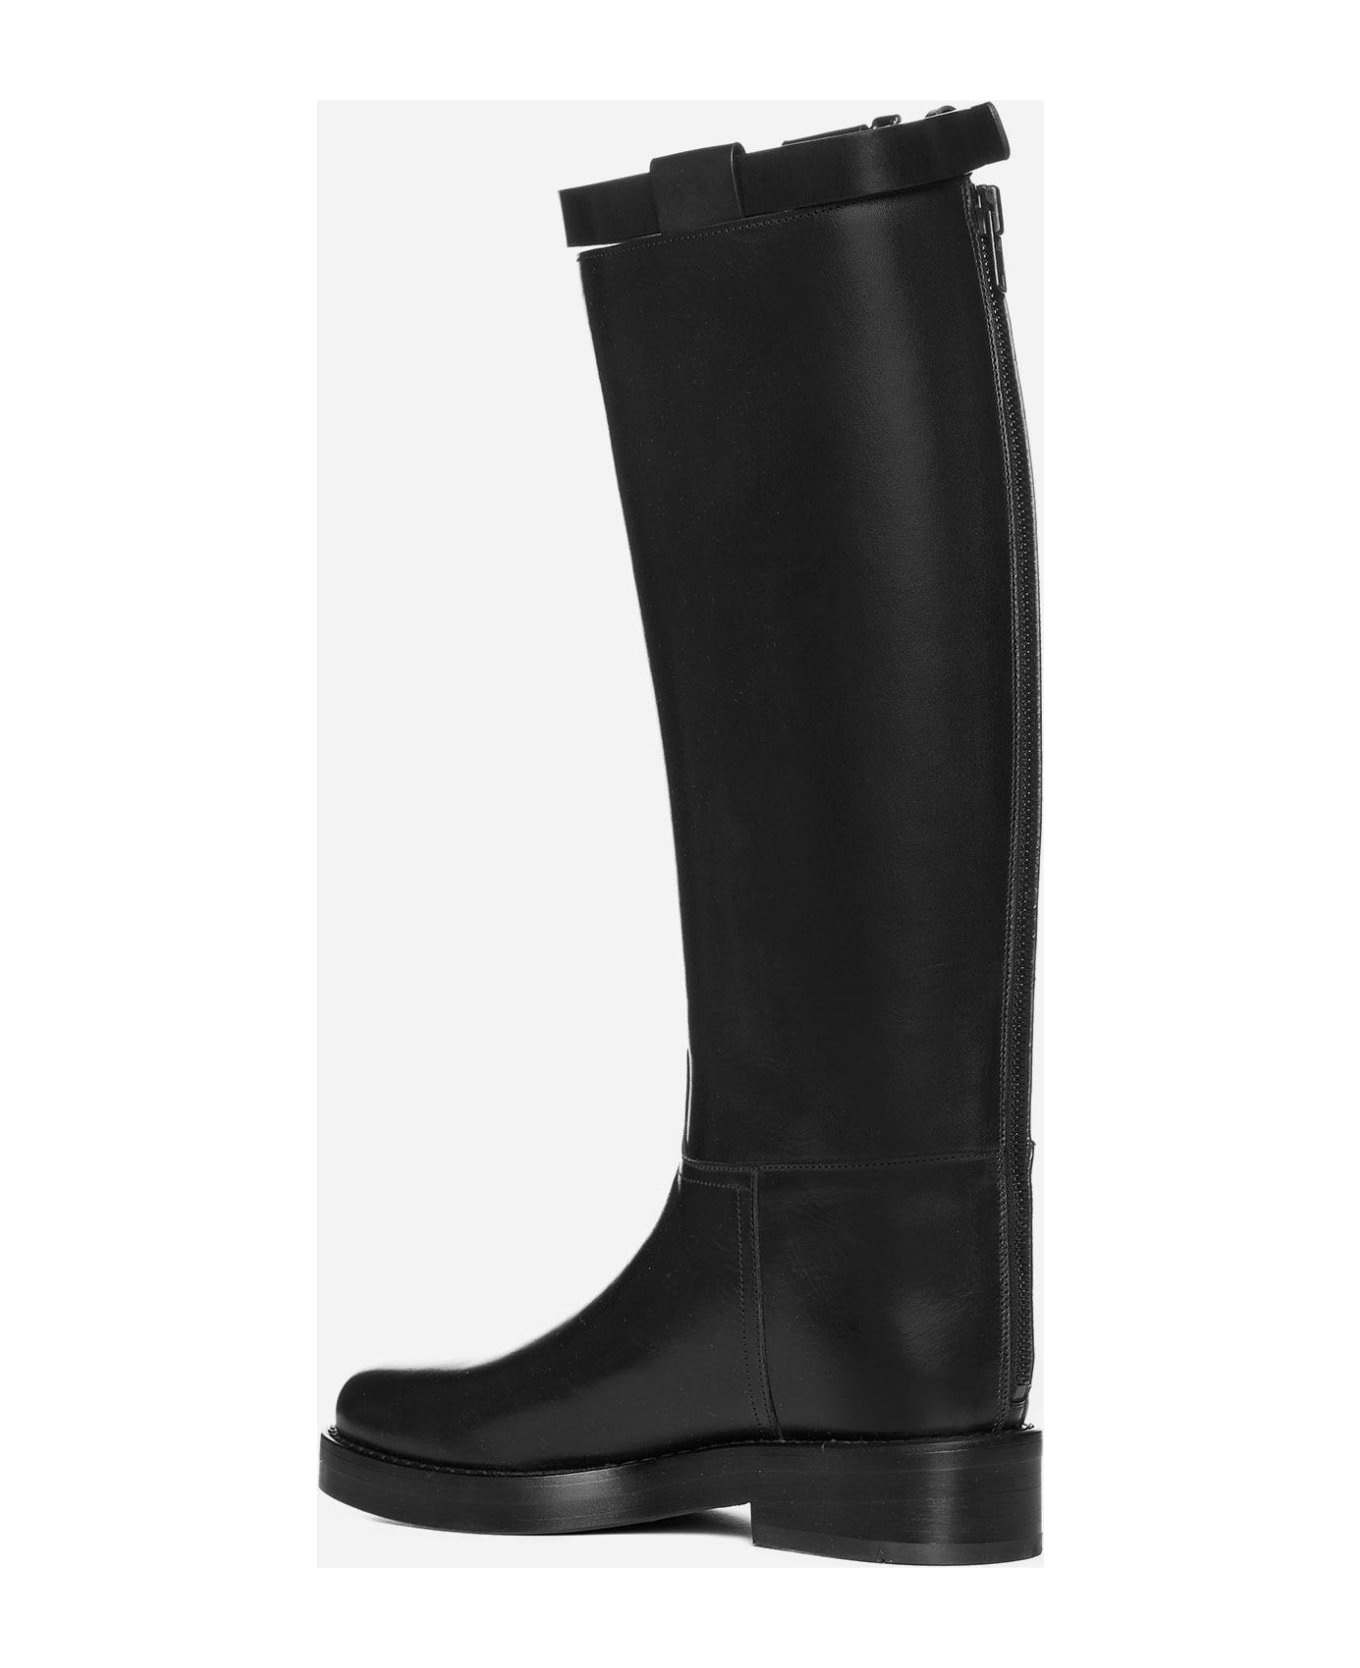 Ann Demeulemeester Stan Riding Leather Boots - Nero ブーツ